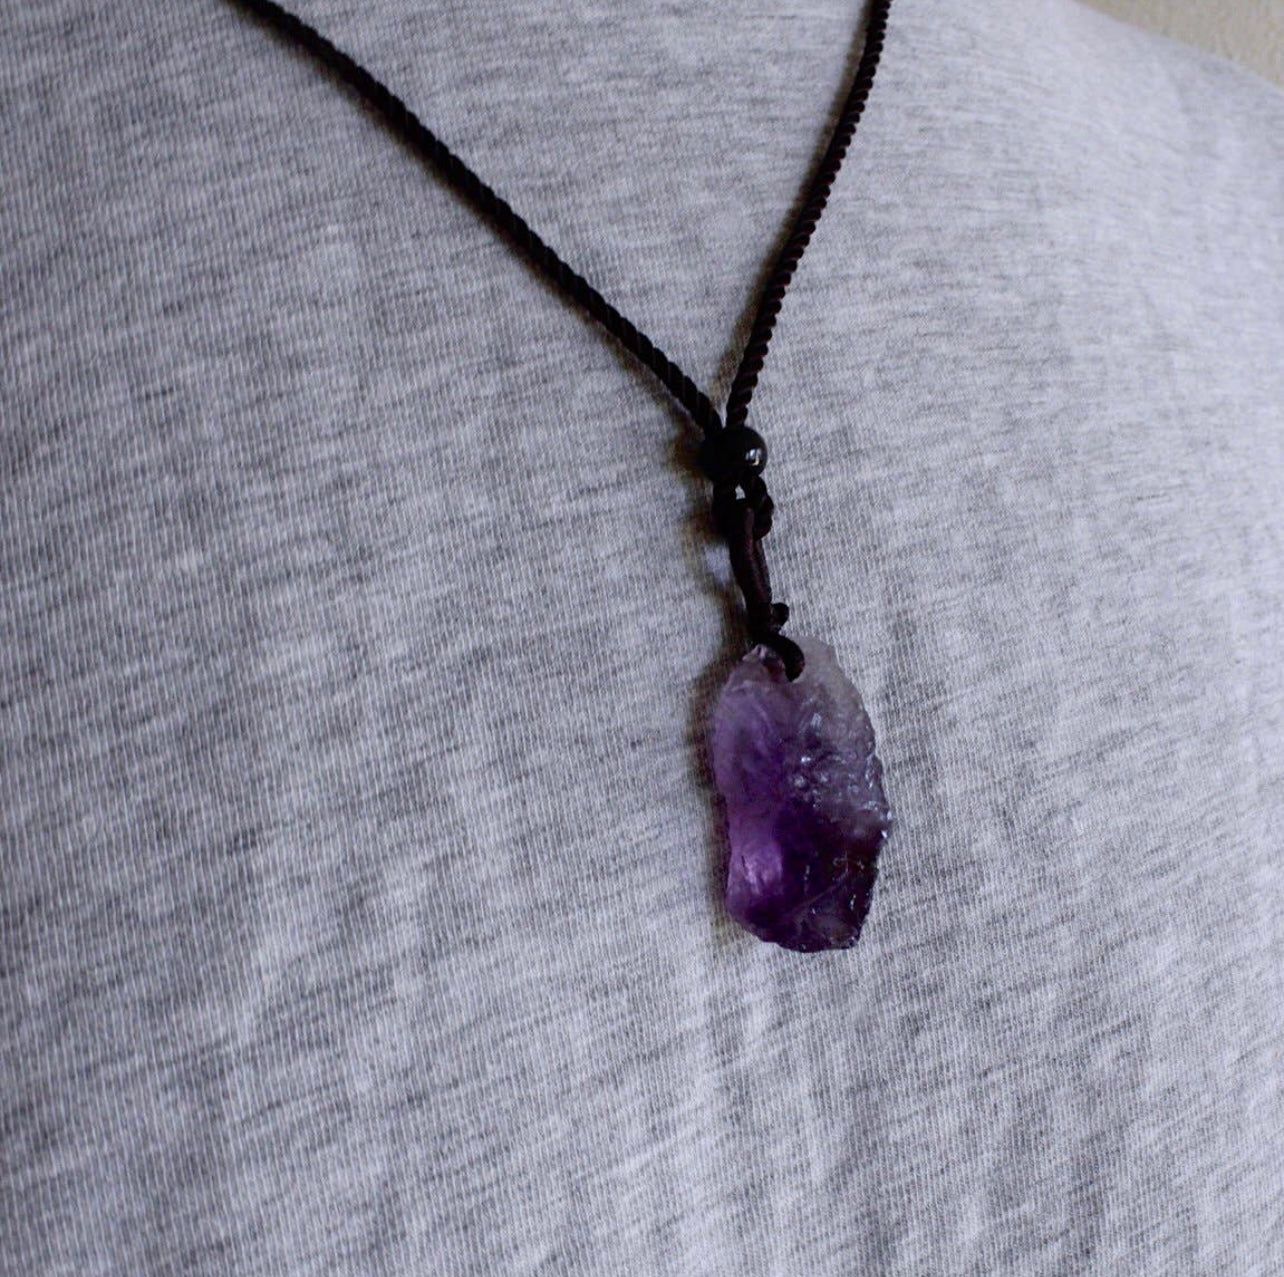 XIANNVXI Amethyst Necklace for Men Adjustable Rope Hexagonal Point Healing  Crystal Natural Stone Pendant Necklaces Gemstone Jewelry - Walmart.com